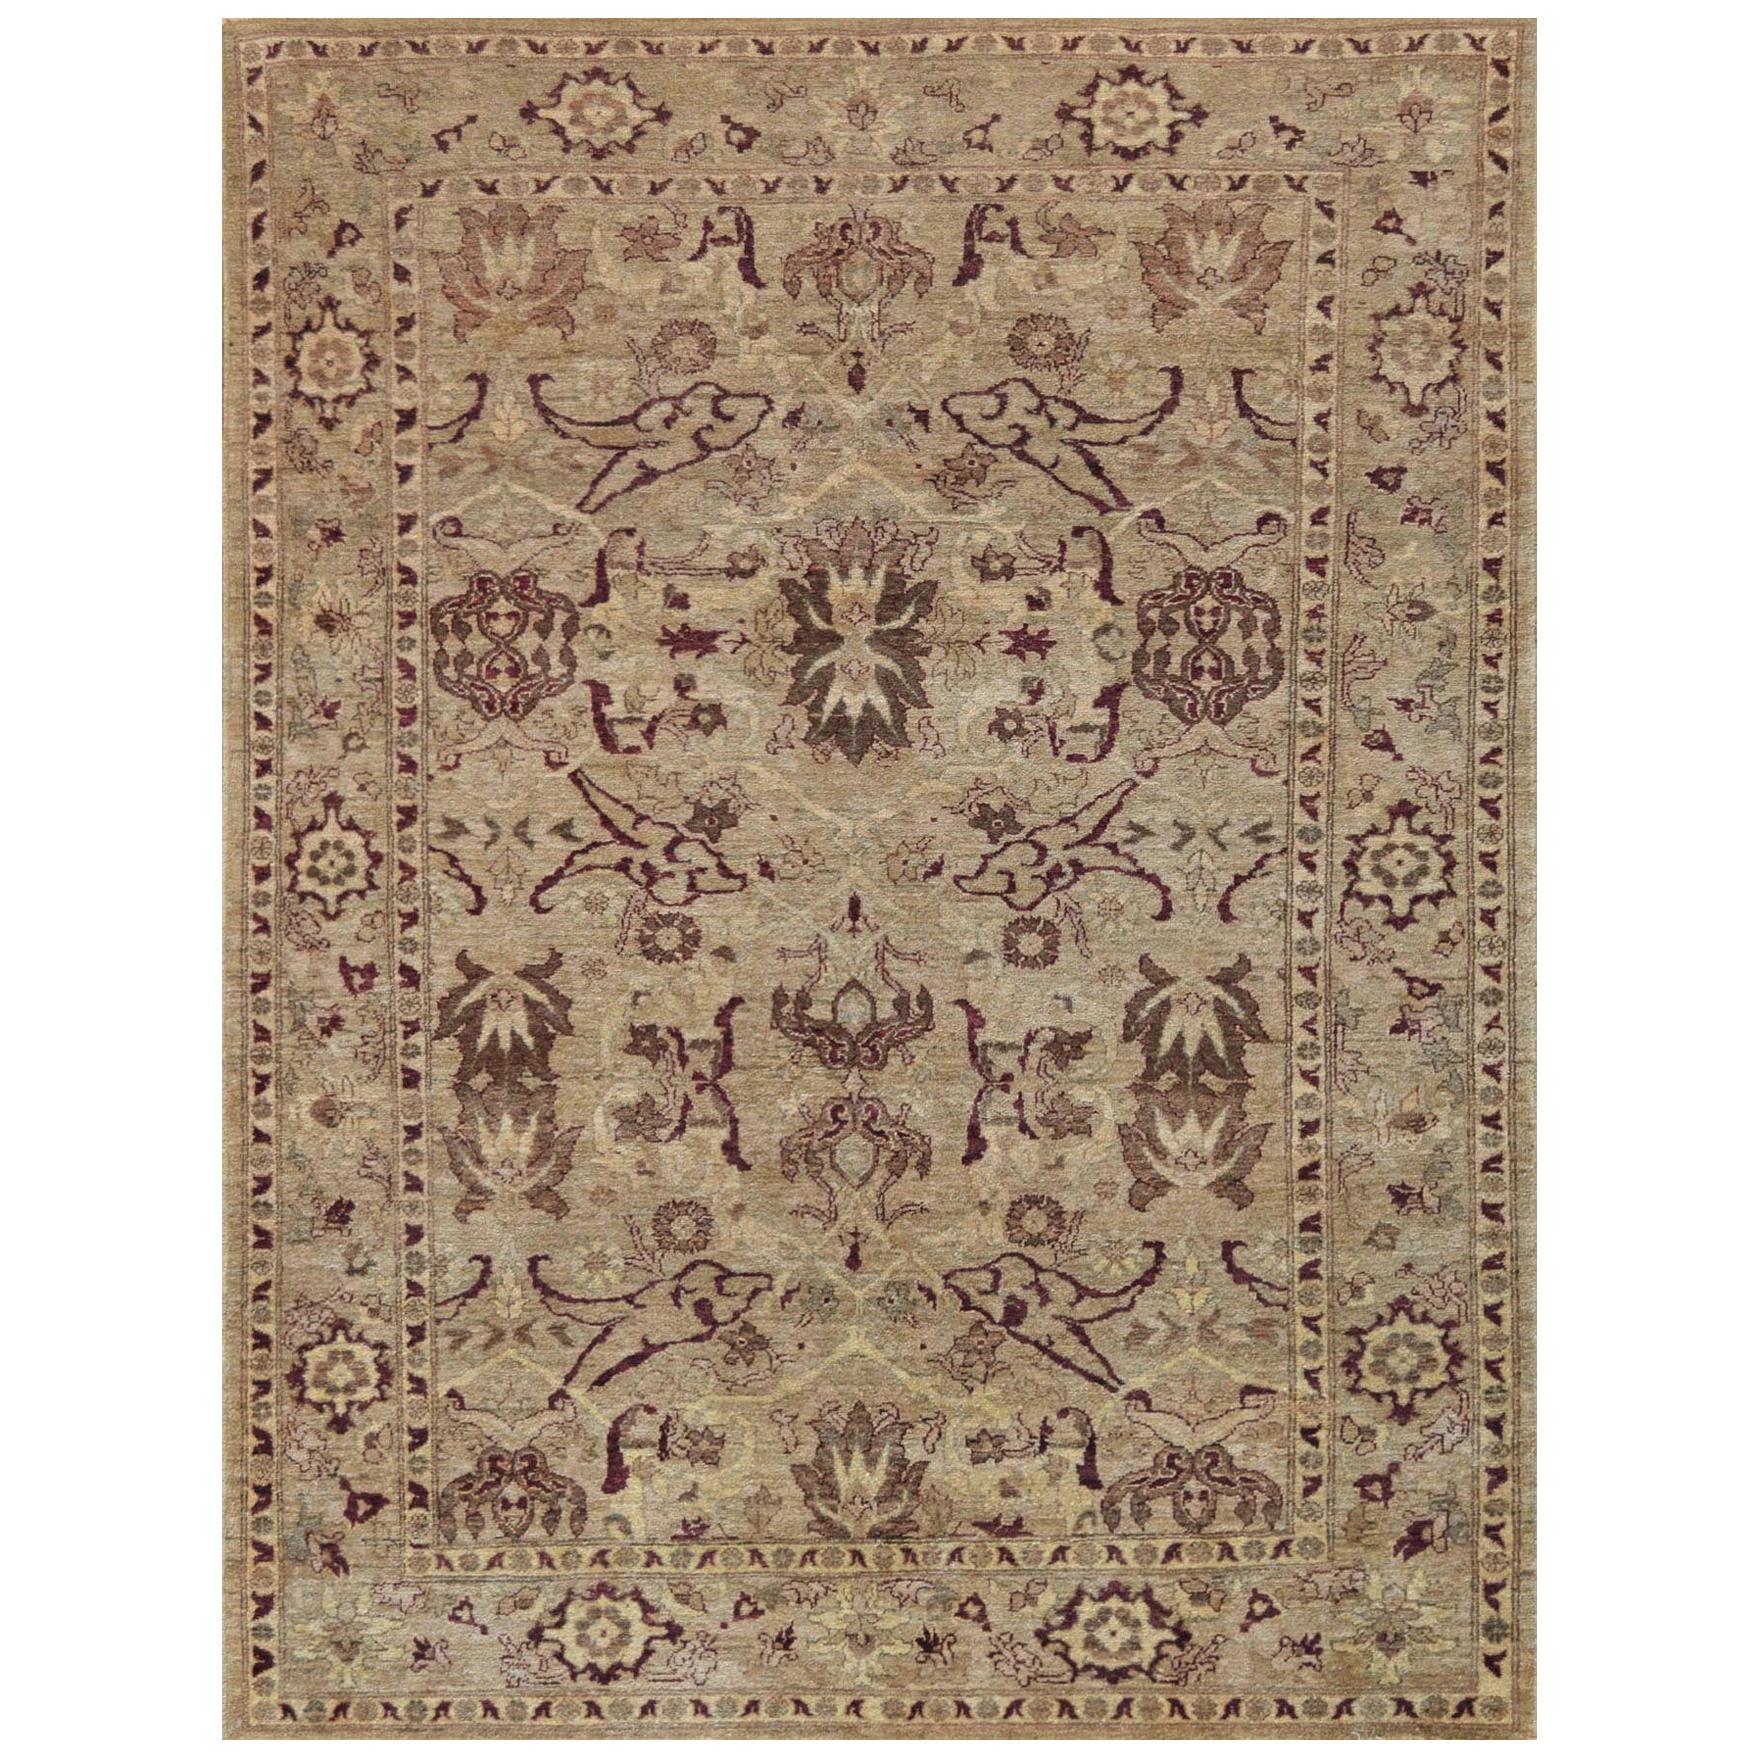 100% Wool Quality Handwoven Agra-Inspired Rug